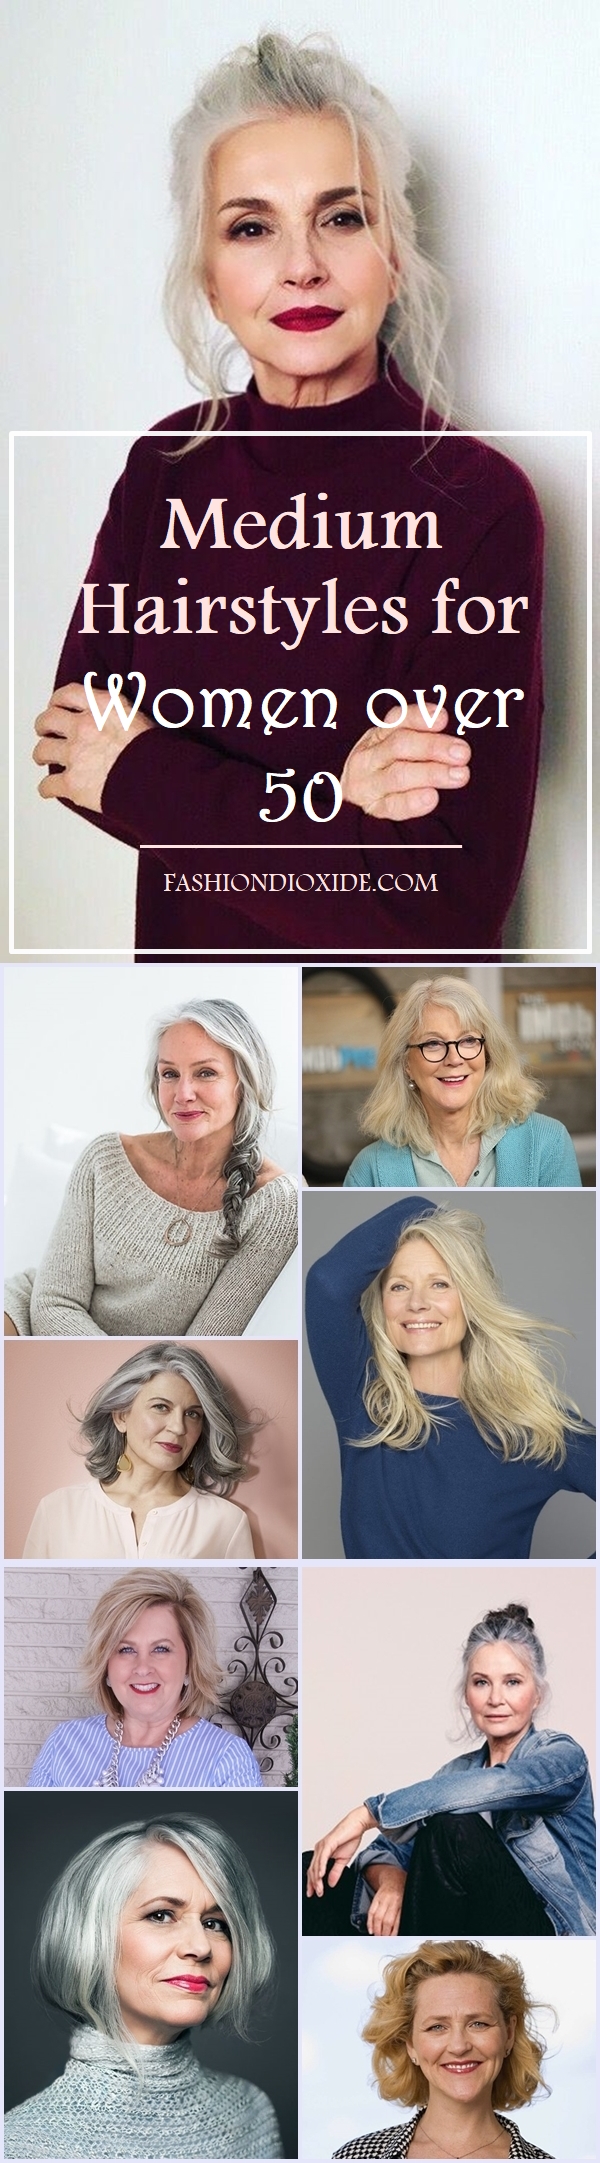 medium-hairstyles-for-women-over-50